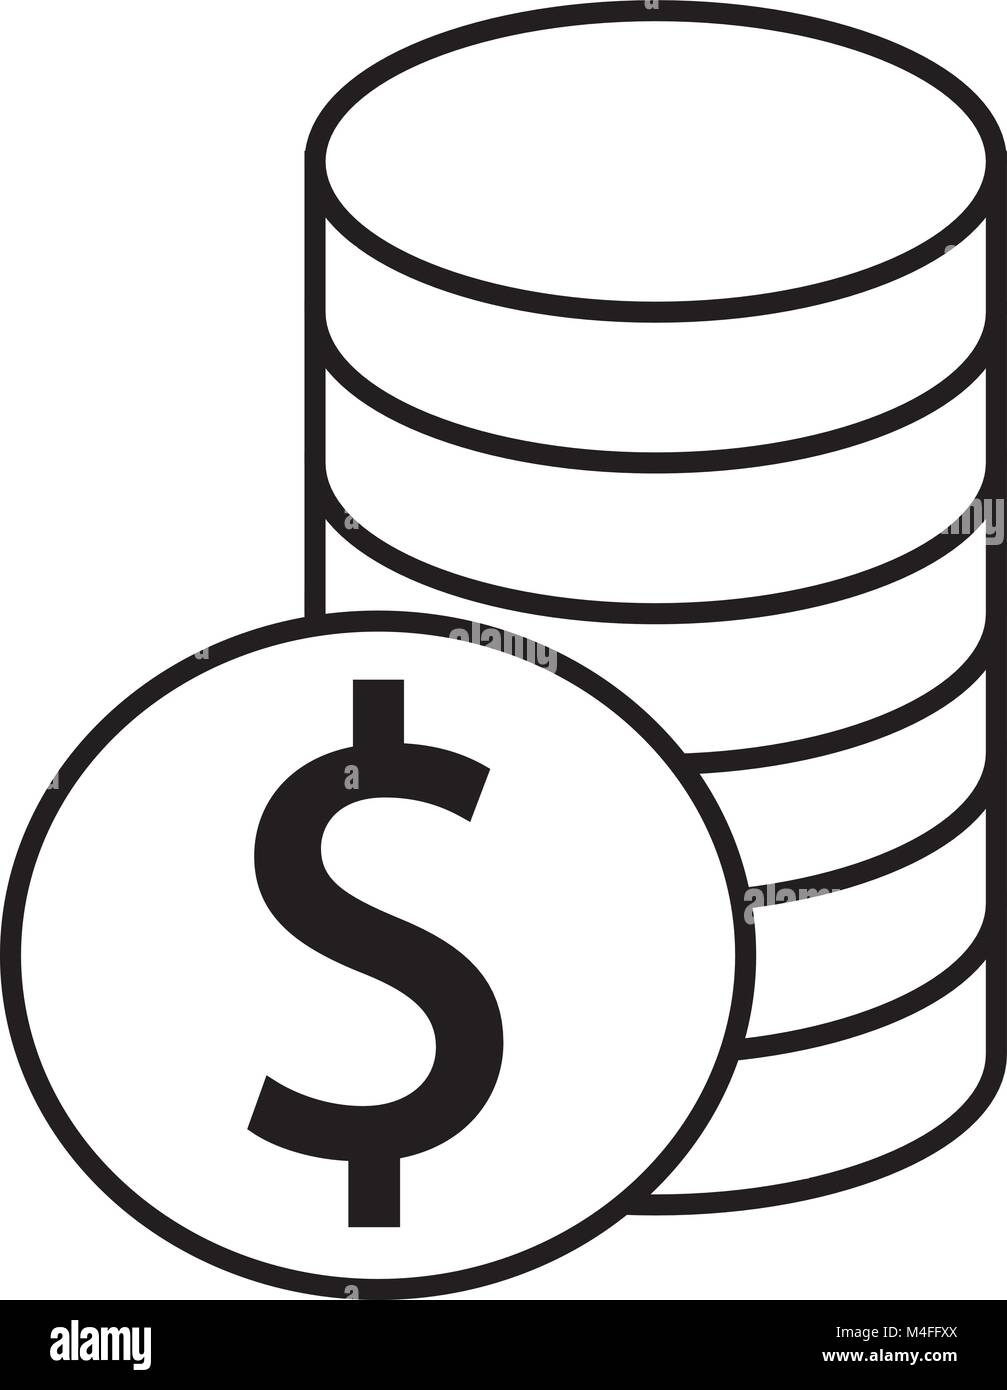 Dollar currency icon or logo vector over a pile of coins stack. Symbol for United States of America bank, banking or American finances. Stock Vector